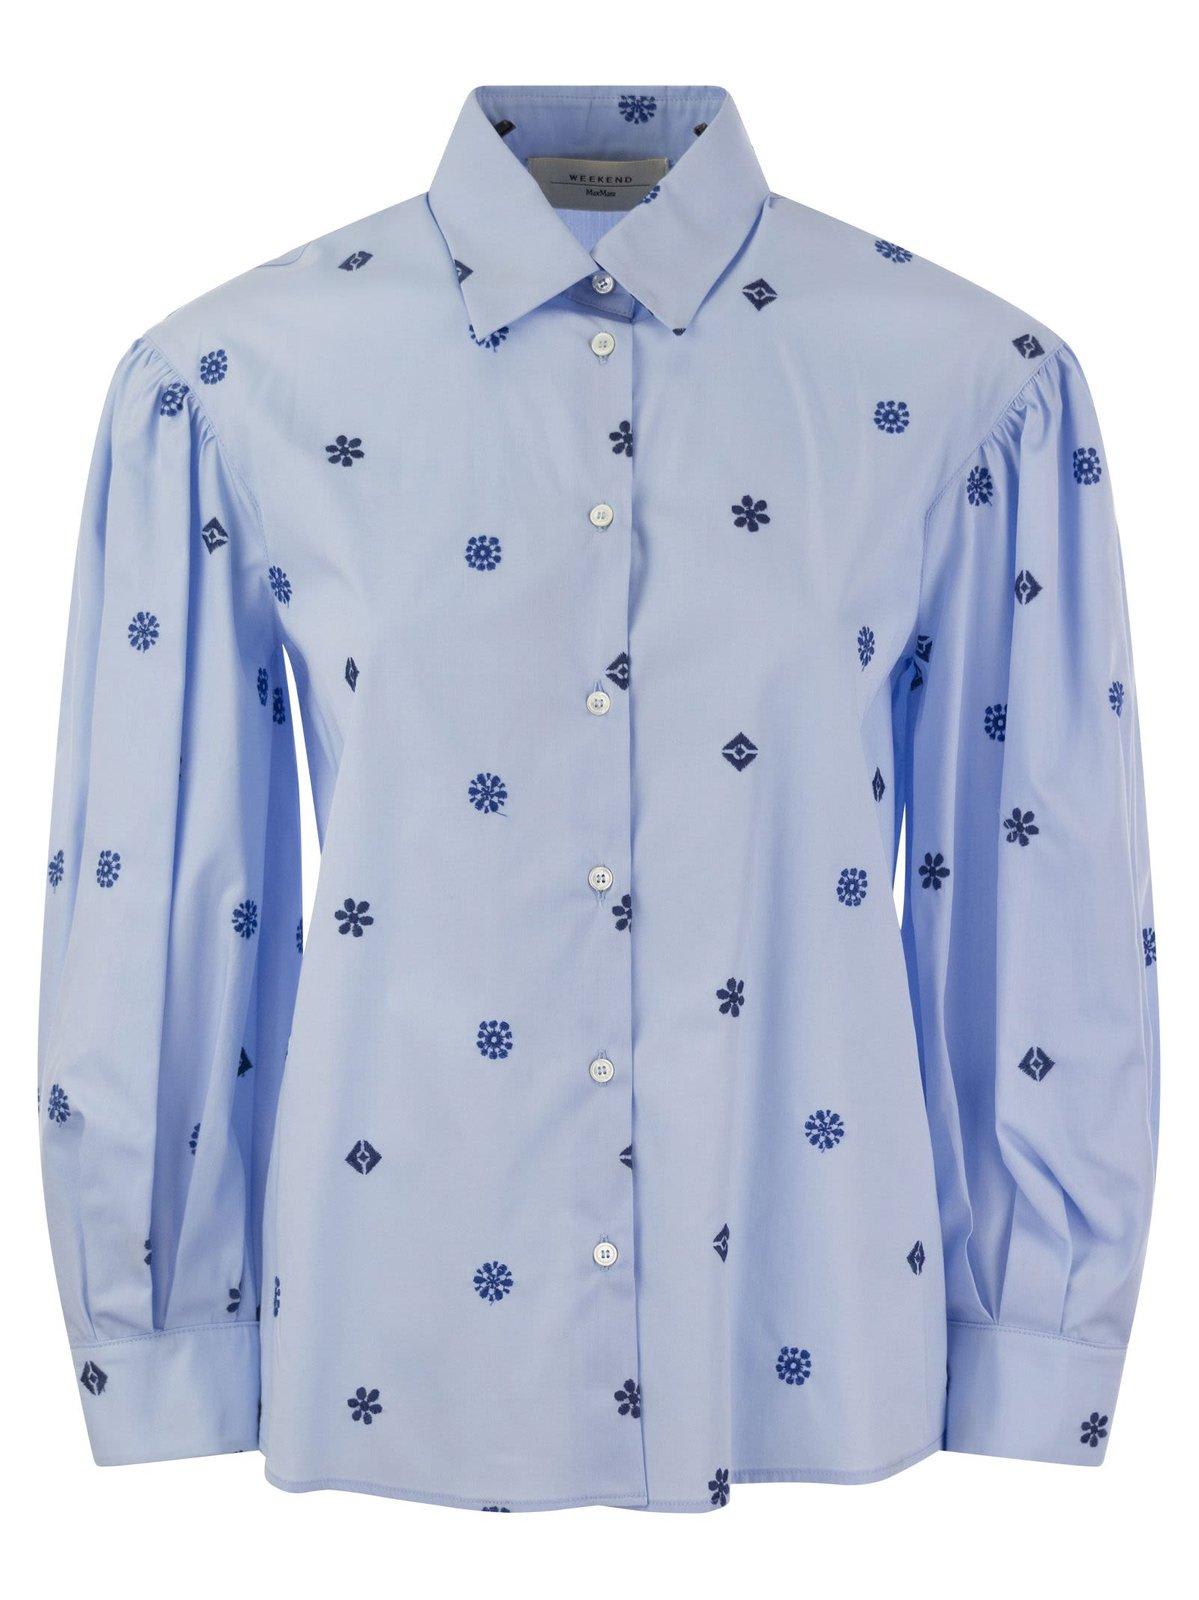 All-over Patterned Long-sleeved Shirt